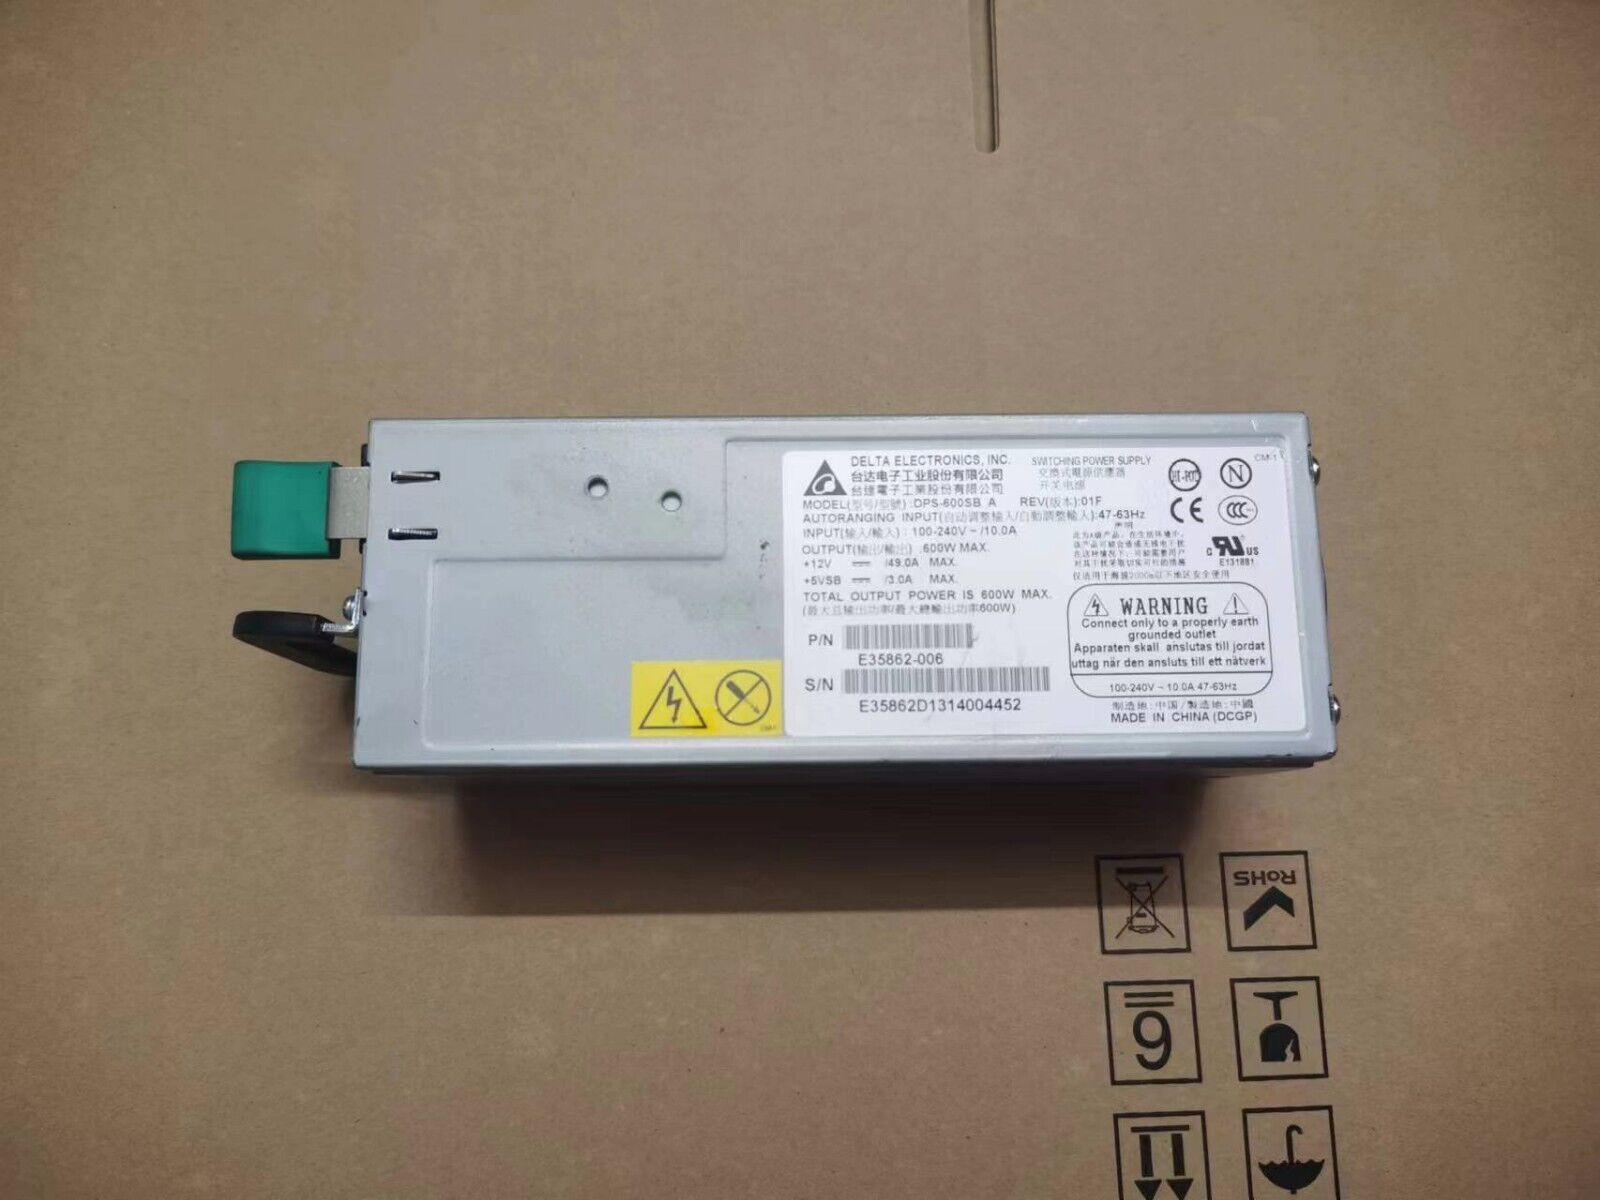 Delta Electronics DPS-600SB A Switching Power Supply 100-240V 600W